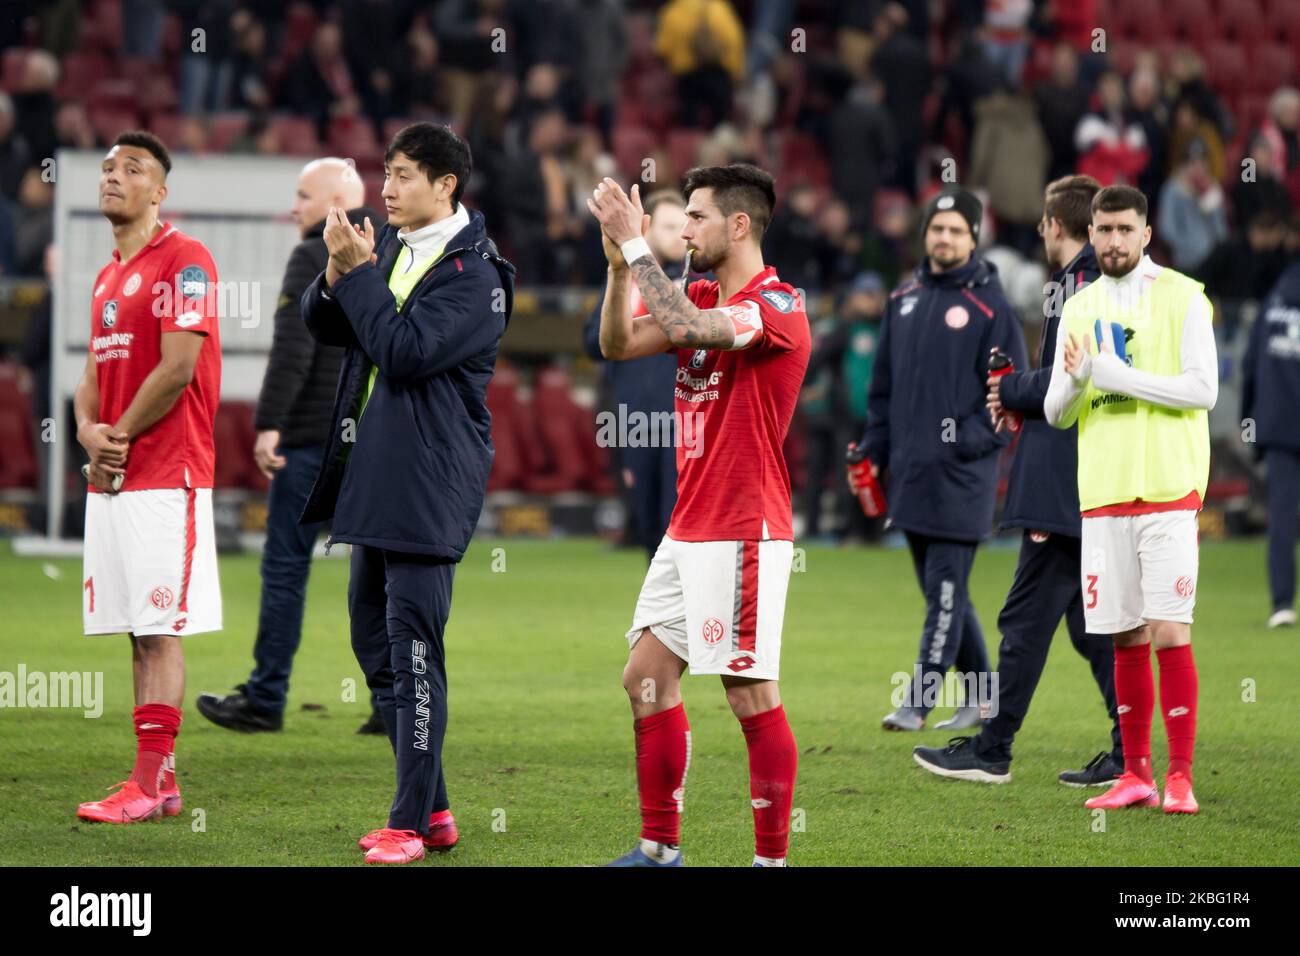 The players of Mainz looks dejected after loosing the 1. Bundesliga match between 1. FSV Mainz 05 and FC Bayern München at the Opel Arena on February 01, 2020 in Mainz, Germany. (Photo by Peter Niedung/NurPhoto) Stock Photo